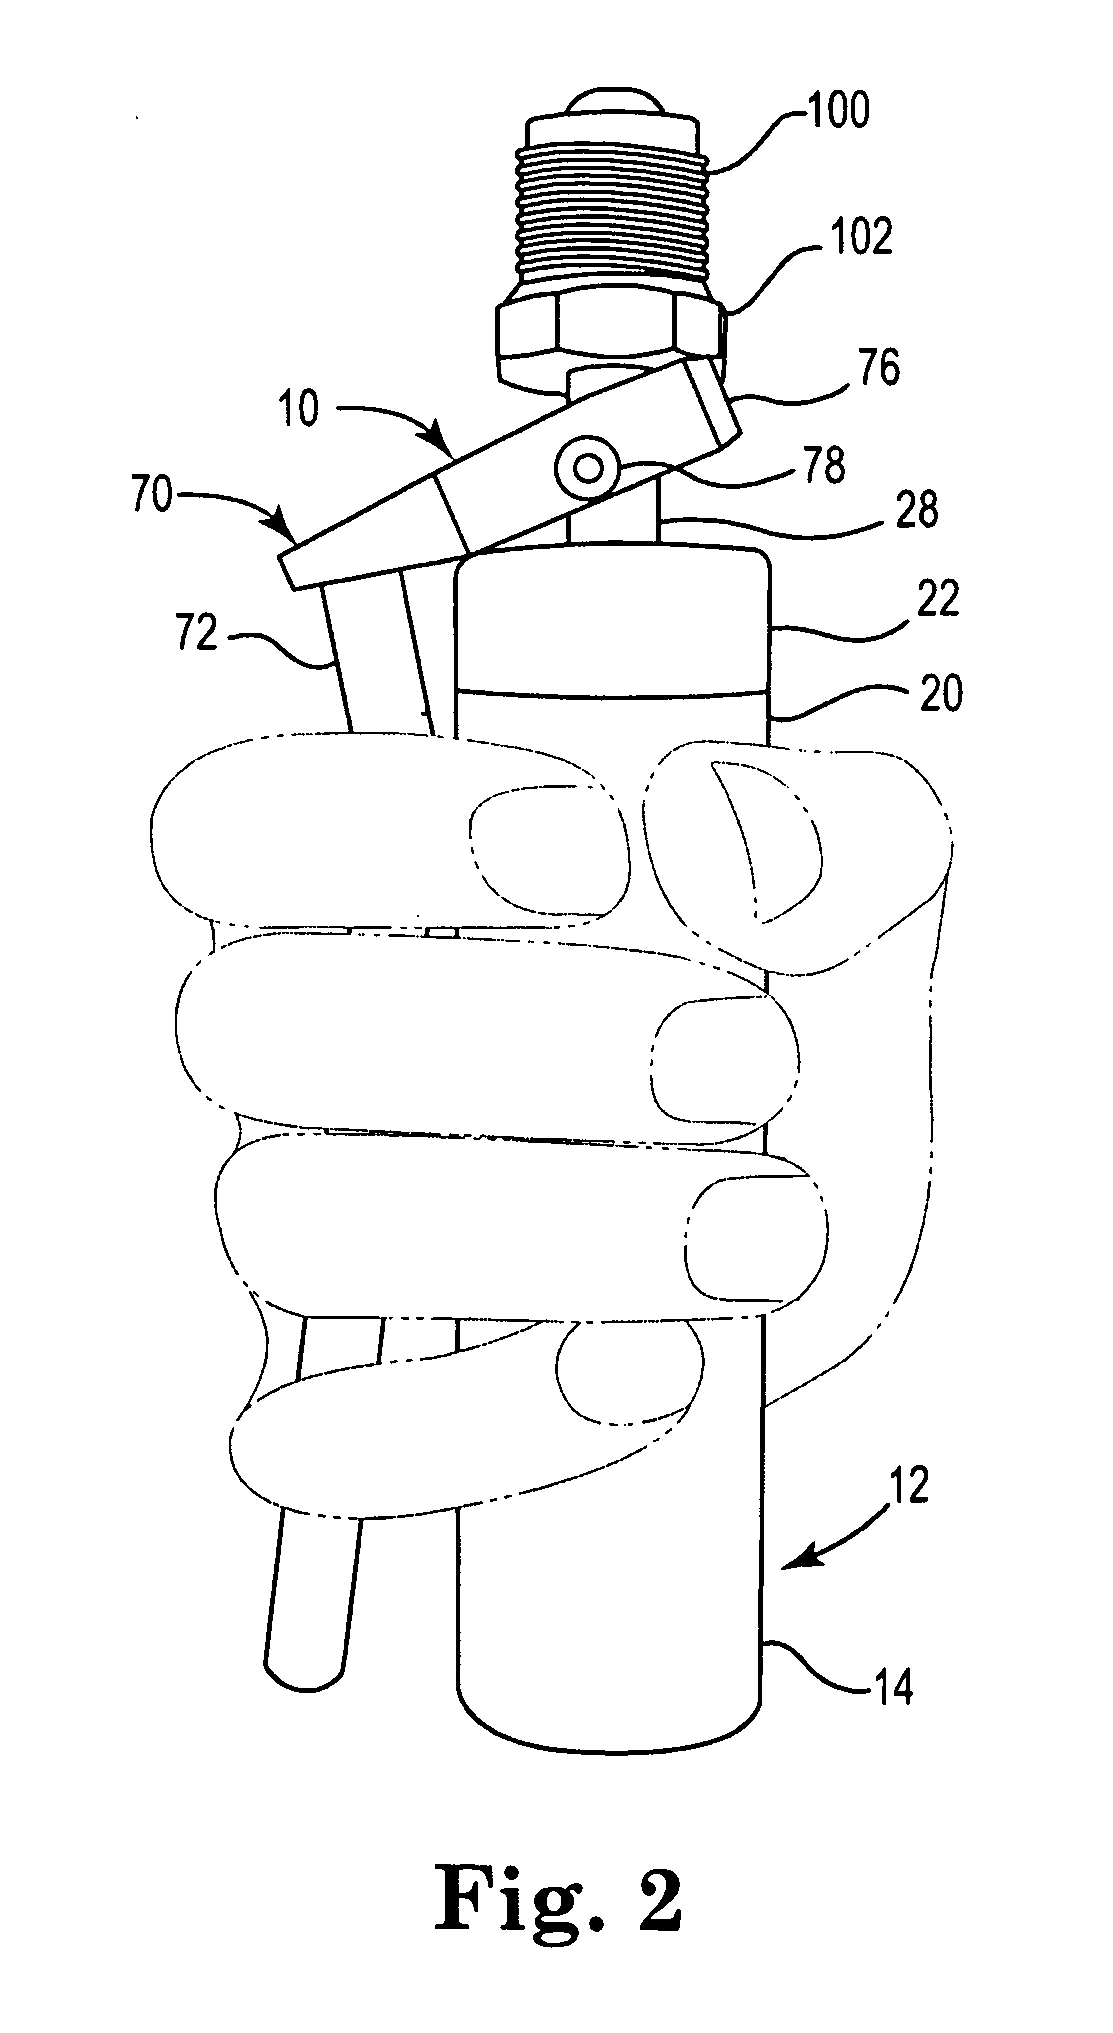 Hydrostatic test tool and method of use